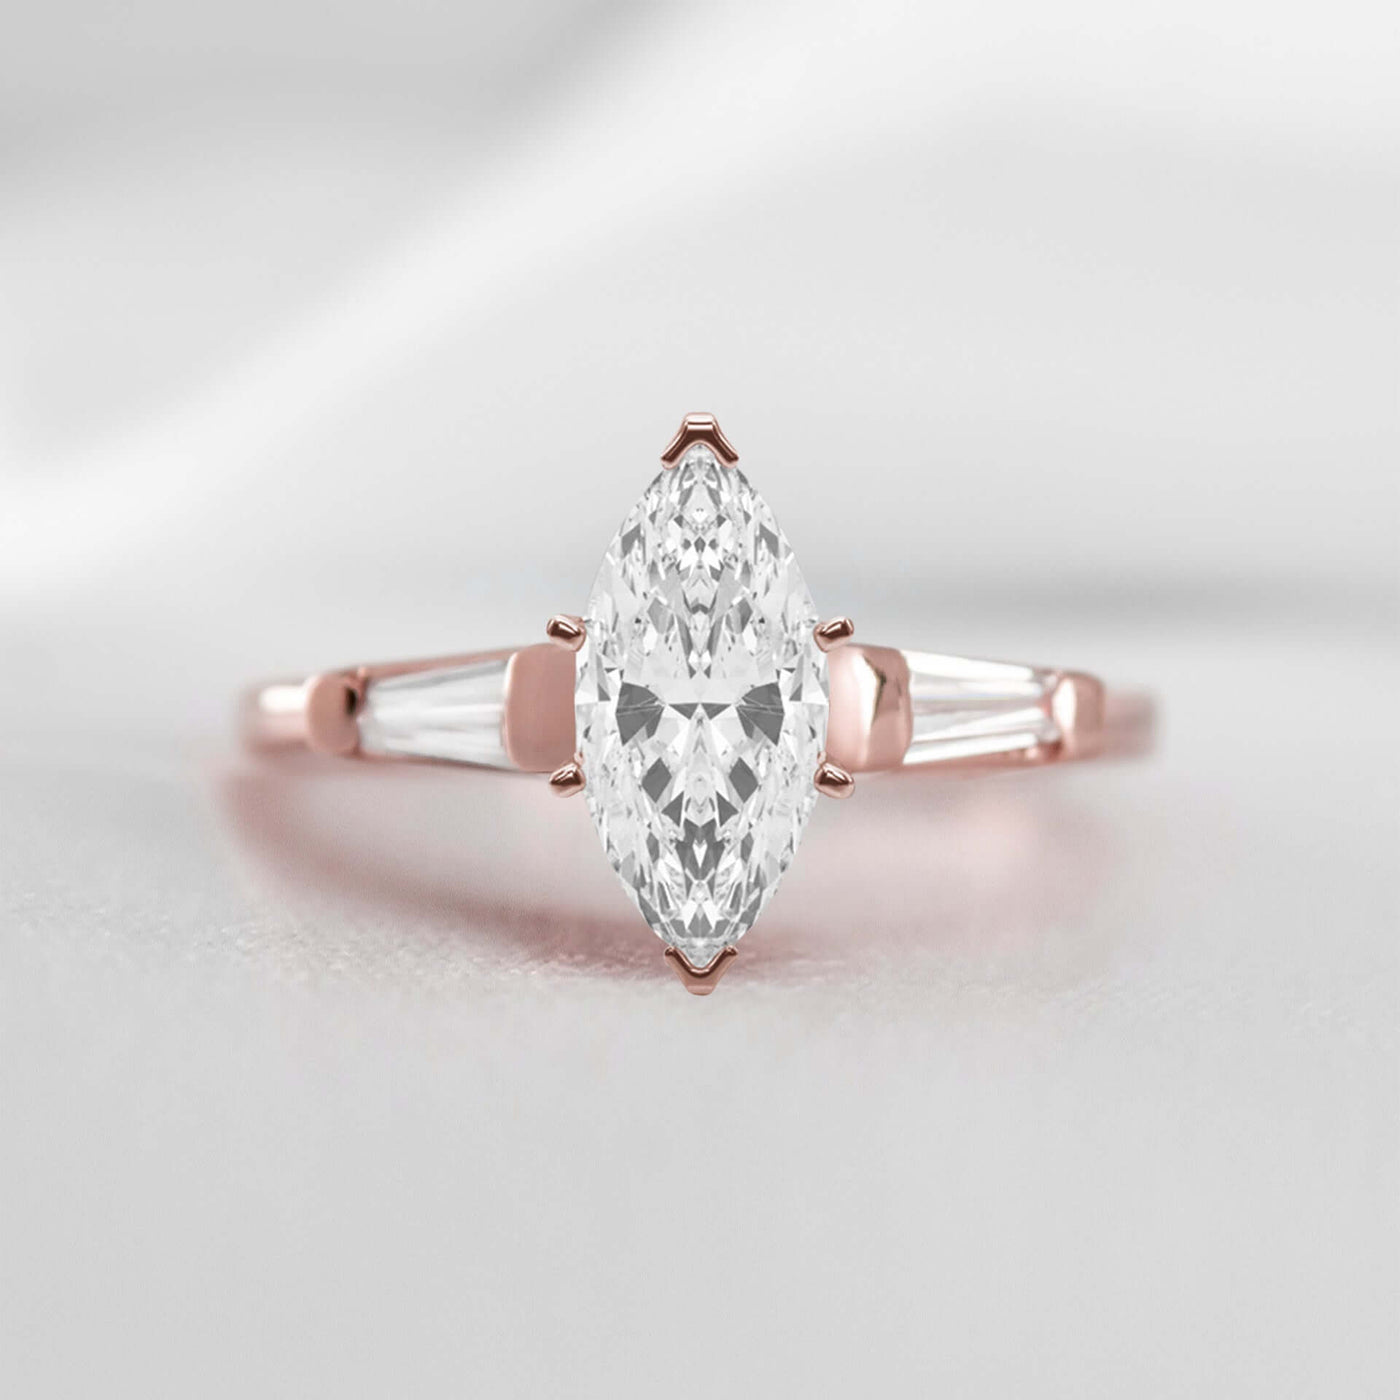 Shown in 1.0 carat * The Devon Three Stone Engagement Ring with Baguettes#shape_marquise